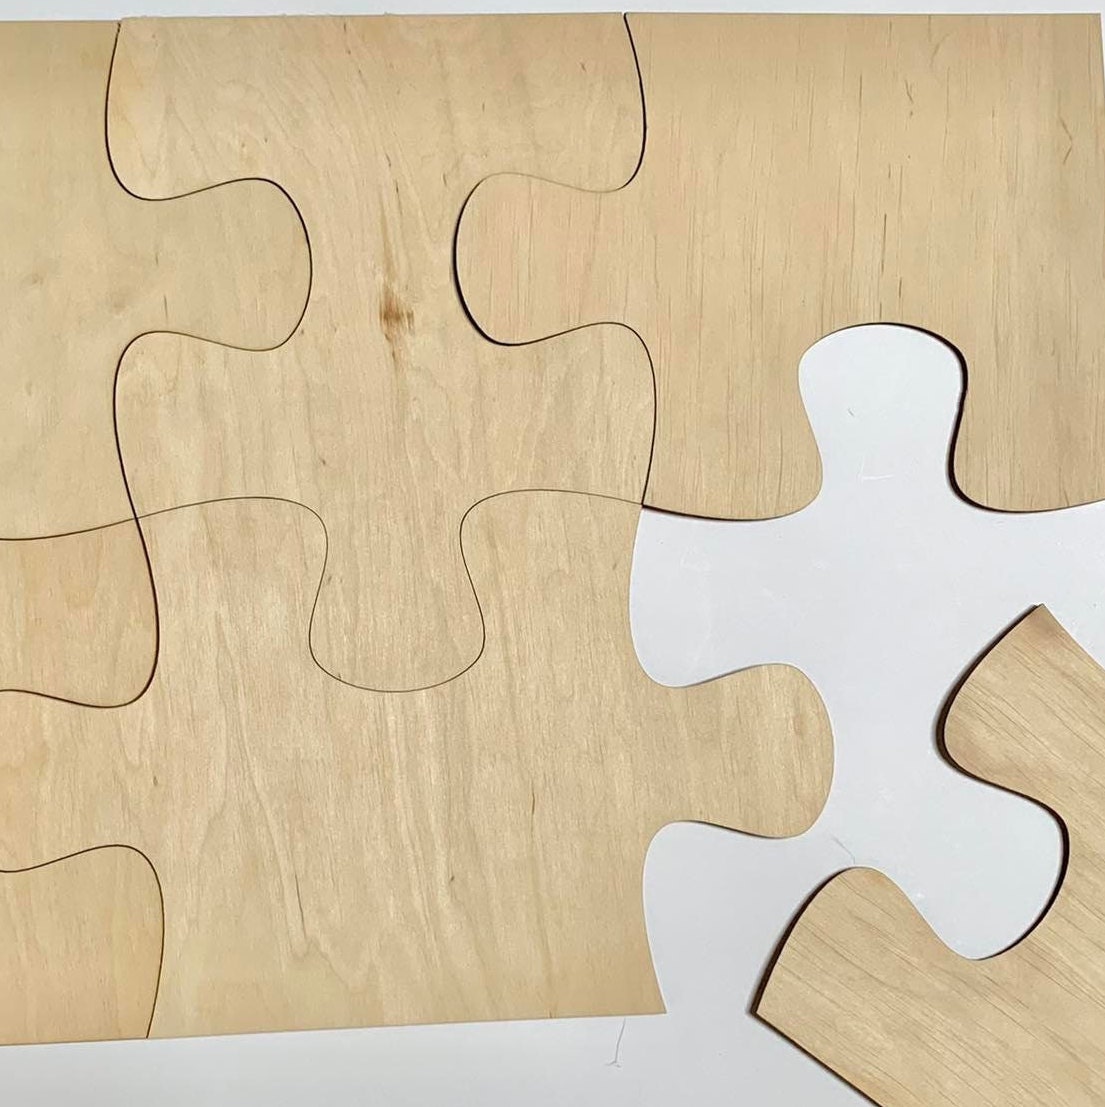 SULOLI Blank Puzzle, Blank Jigsaw Puzzles to Draw on White Puzzles for DIY Projects(12 Pieces)